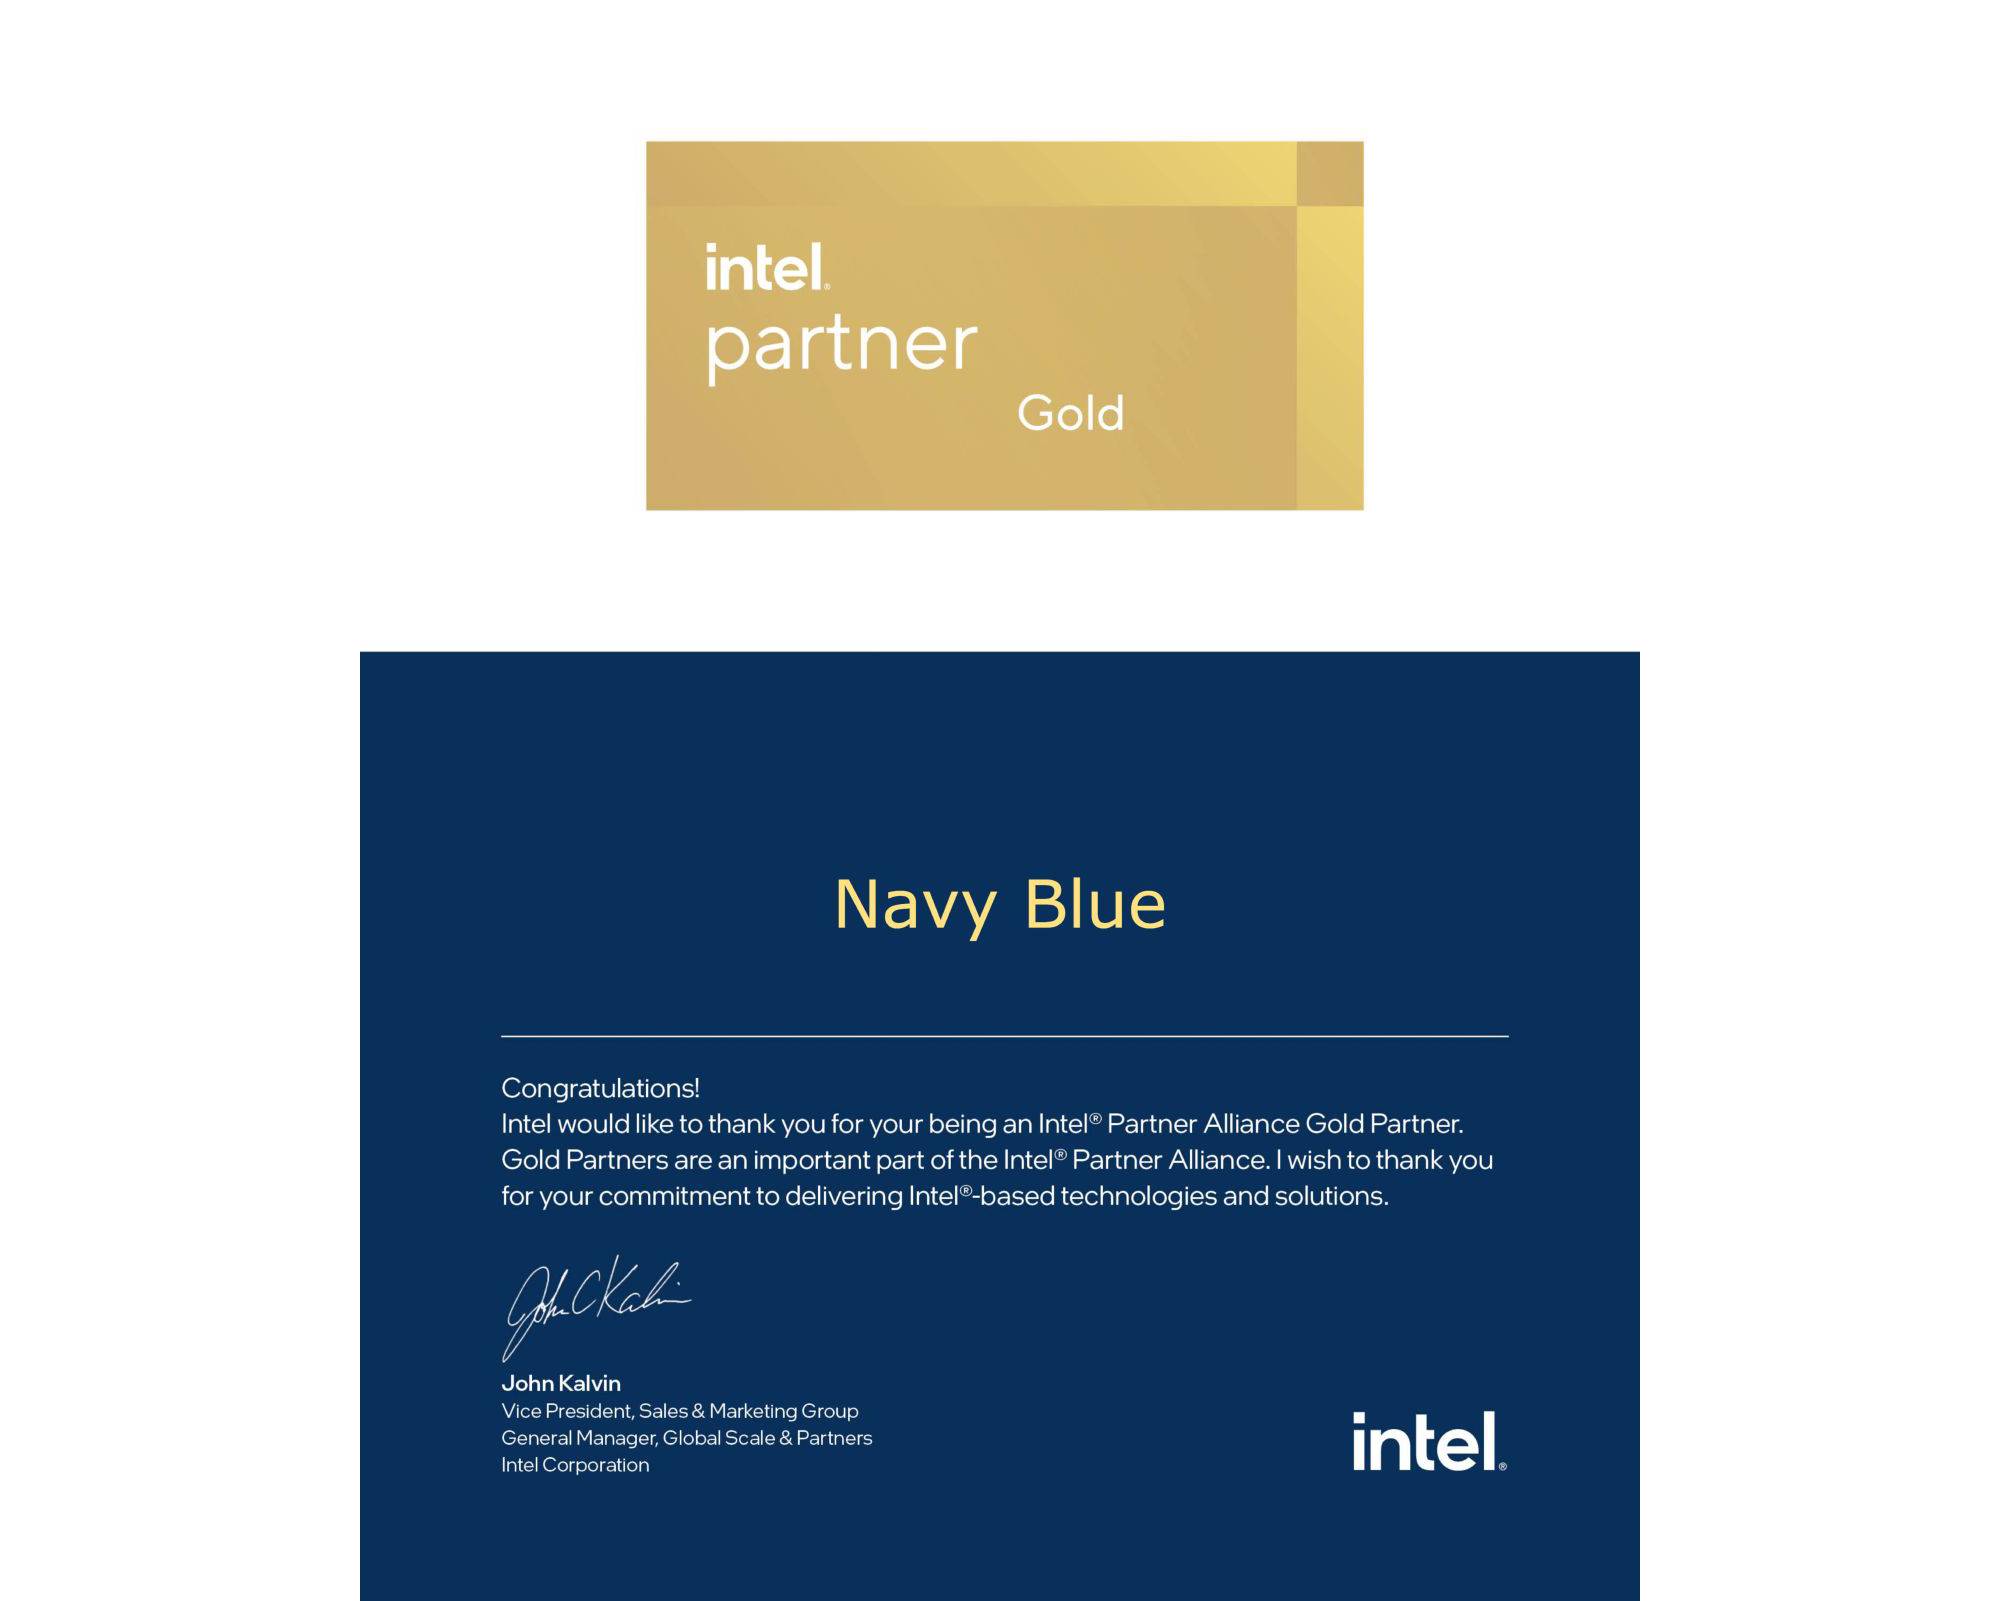 Navy Blue OÜ becomes official partner of Intel